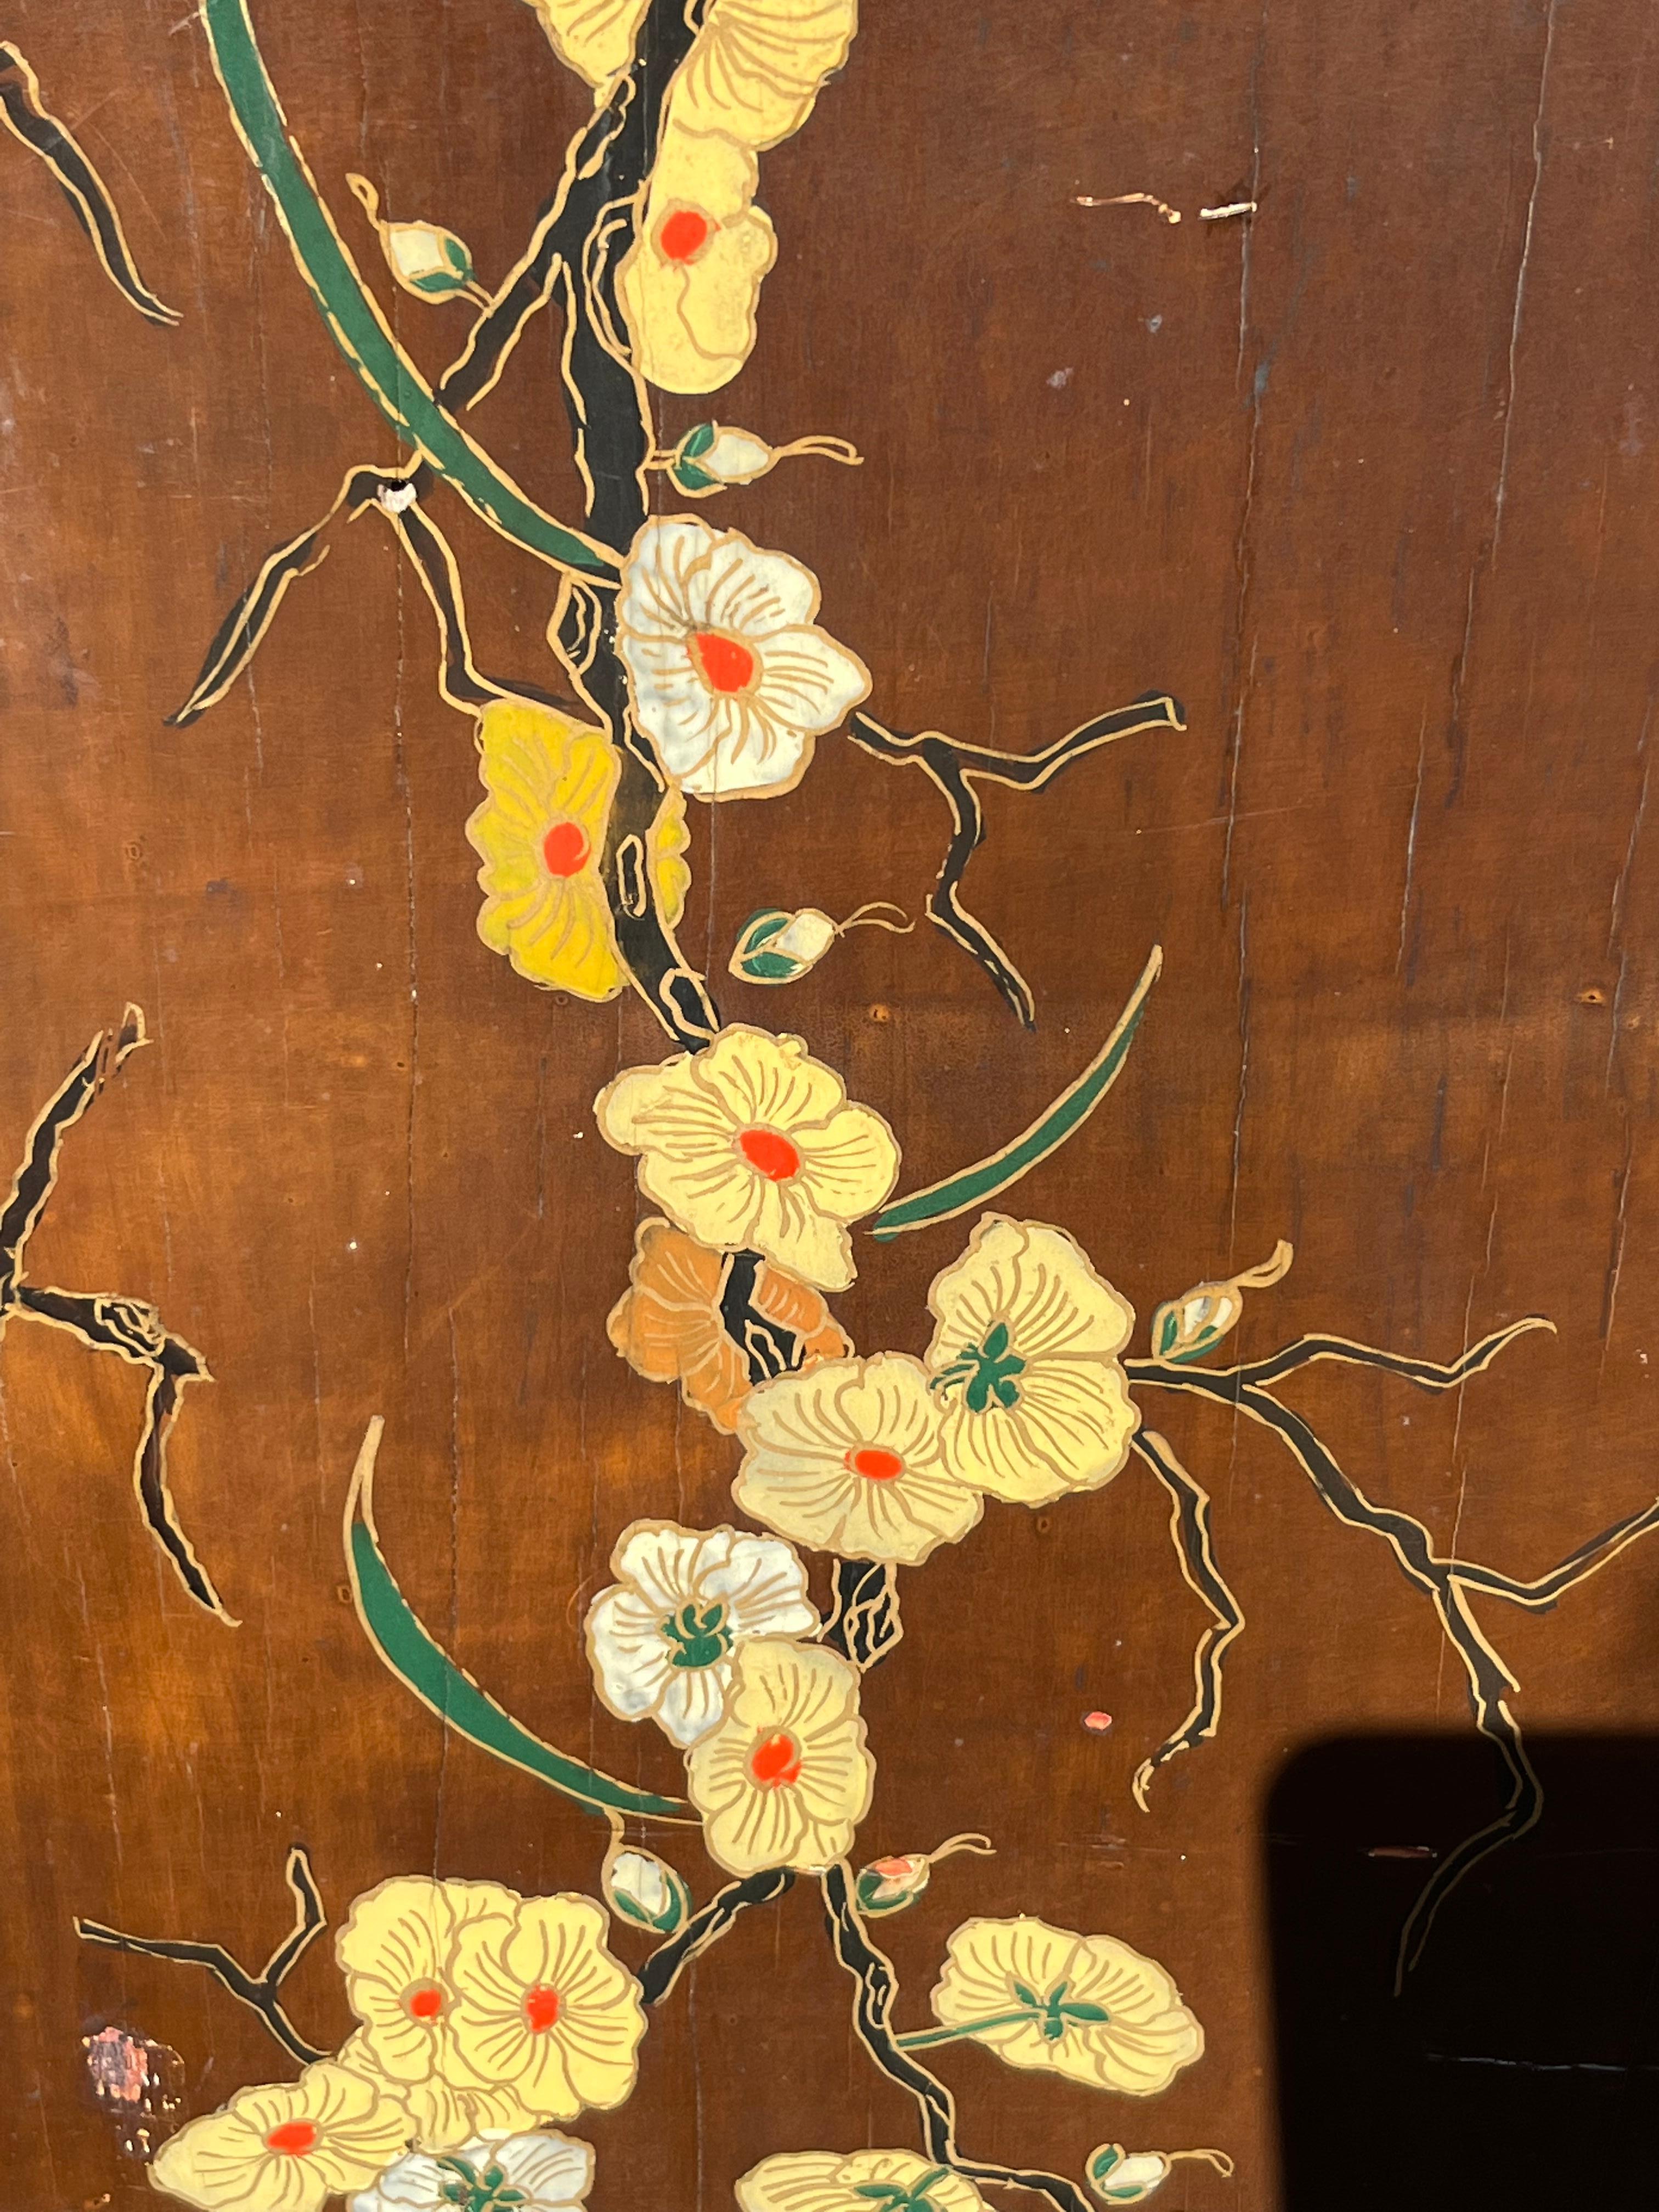 Two Lacquer panels on wood Japanese inspiration soft colors , floral theme.
Style Art Nouveau// Art Deco.
French origine.
Could fit perfectly above a pair of Art Deco or art Nouveau console tables.

